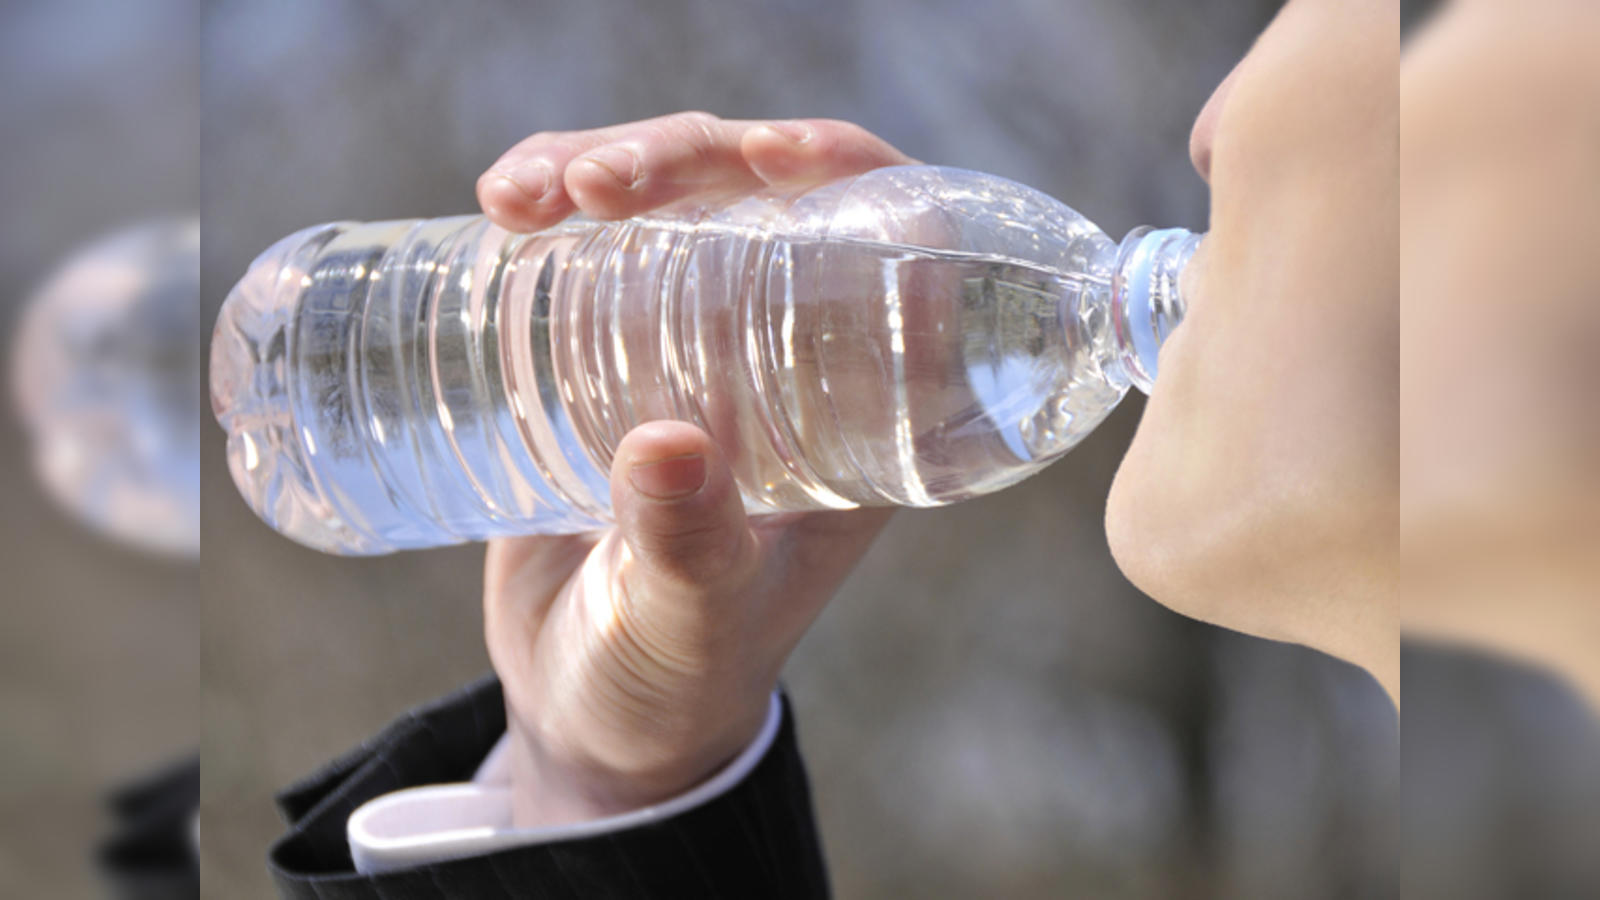 Is Drinking From A Frozen Plastic Water Bottle Safe?